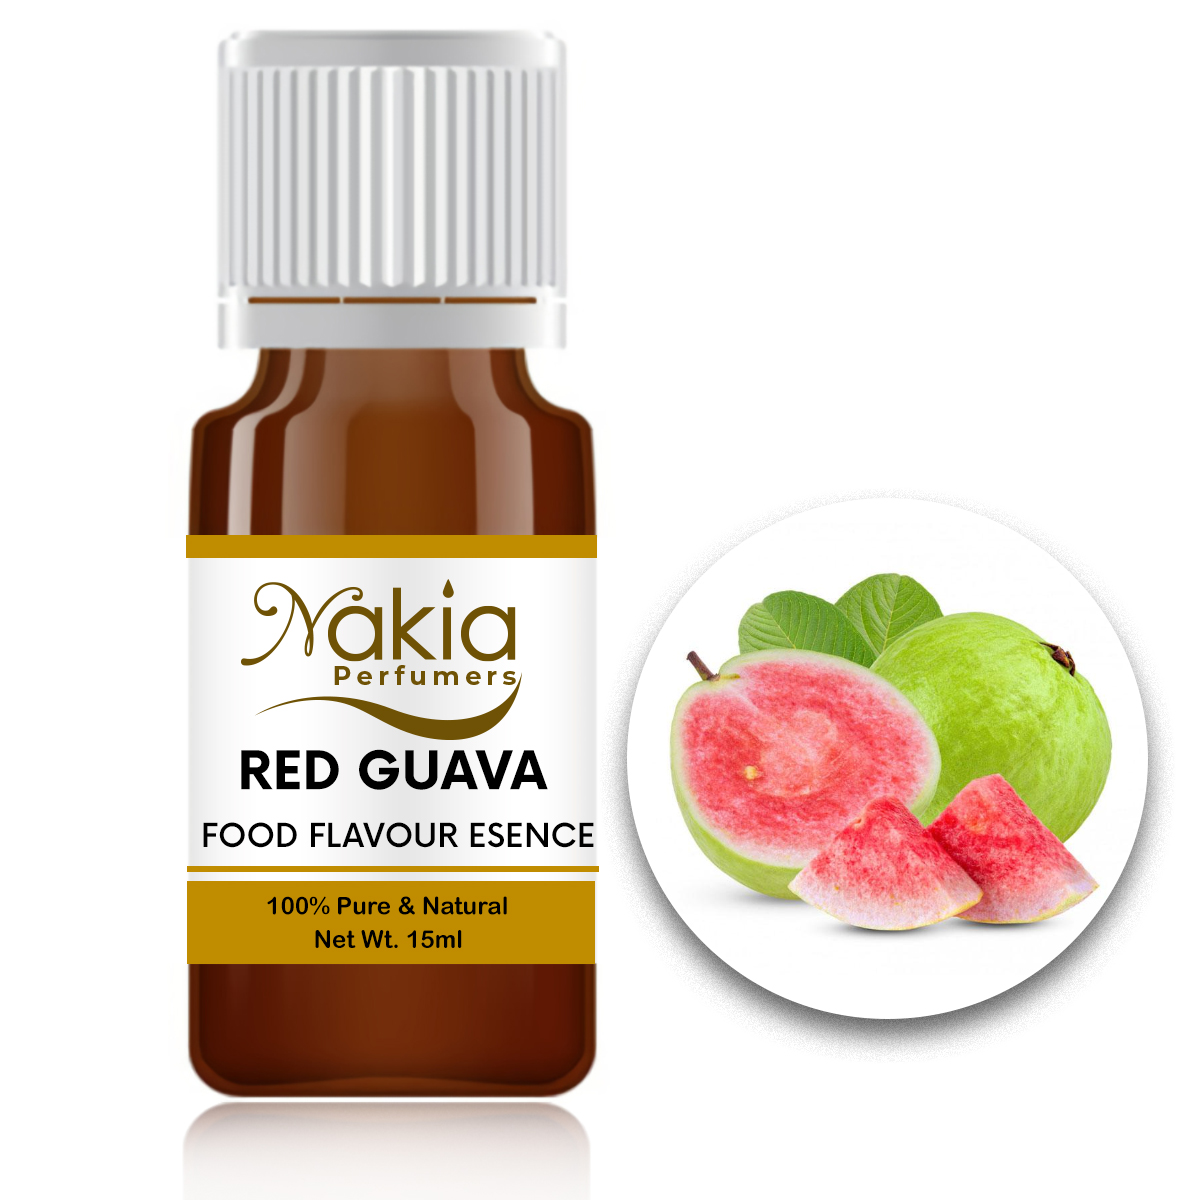 RED-GUAVA FLAVOURING ESSENCE